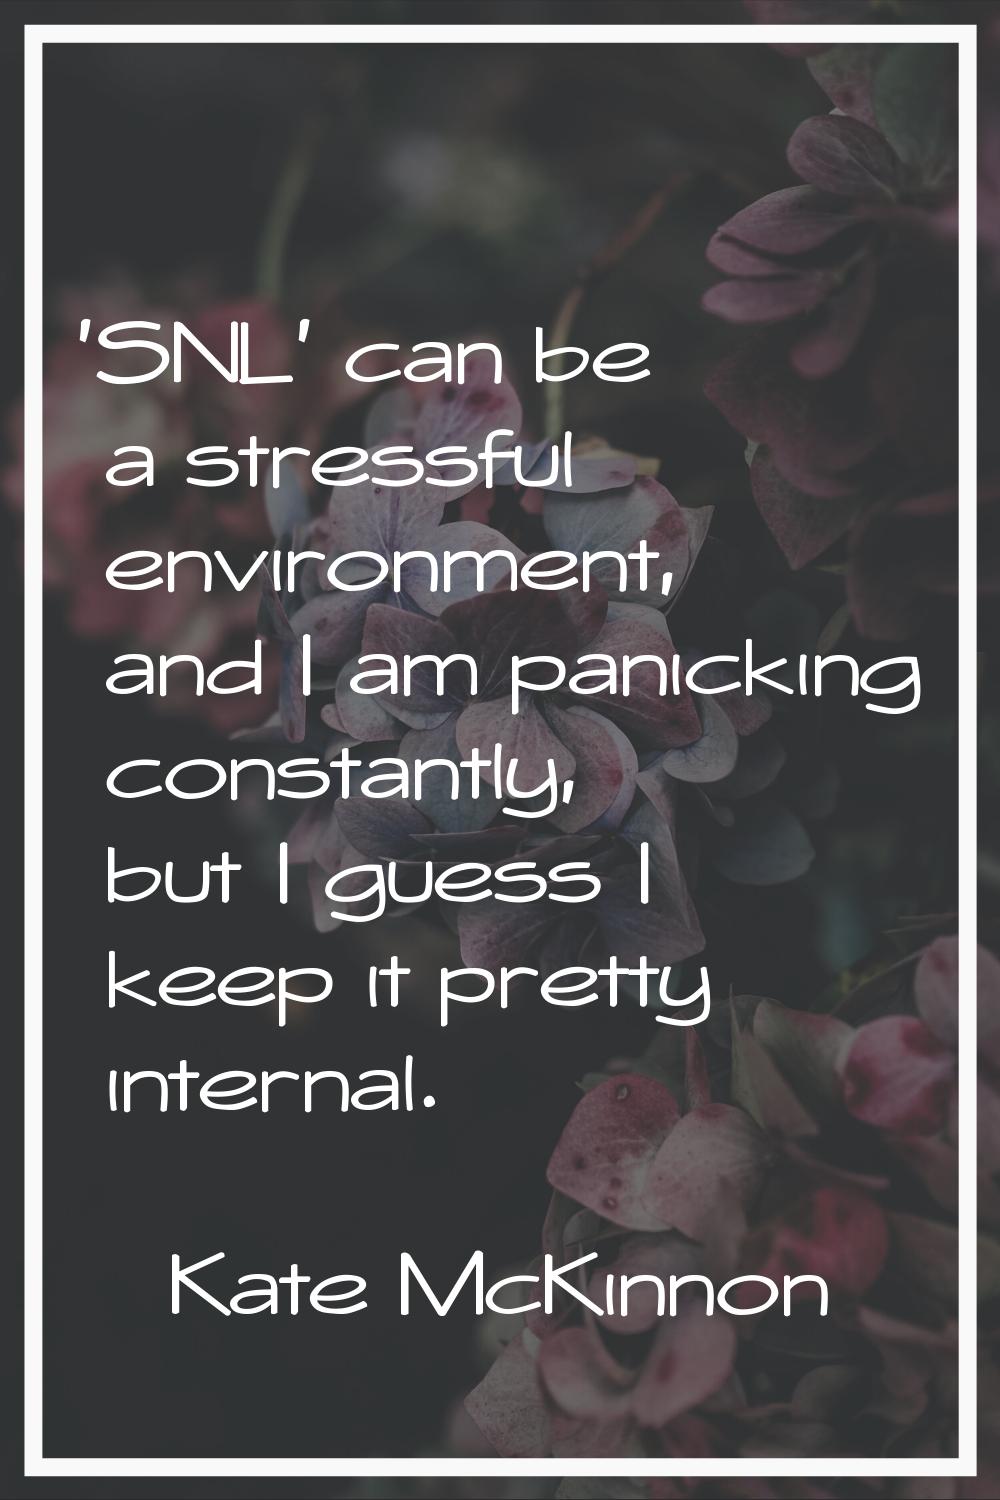 'SNL' can be a stressful environment, and I am panicking constantly, but I guess I keep it pretty i